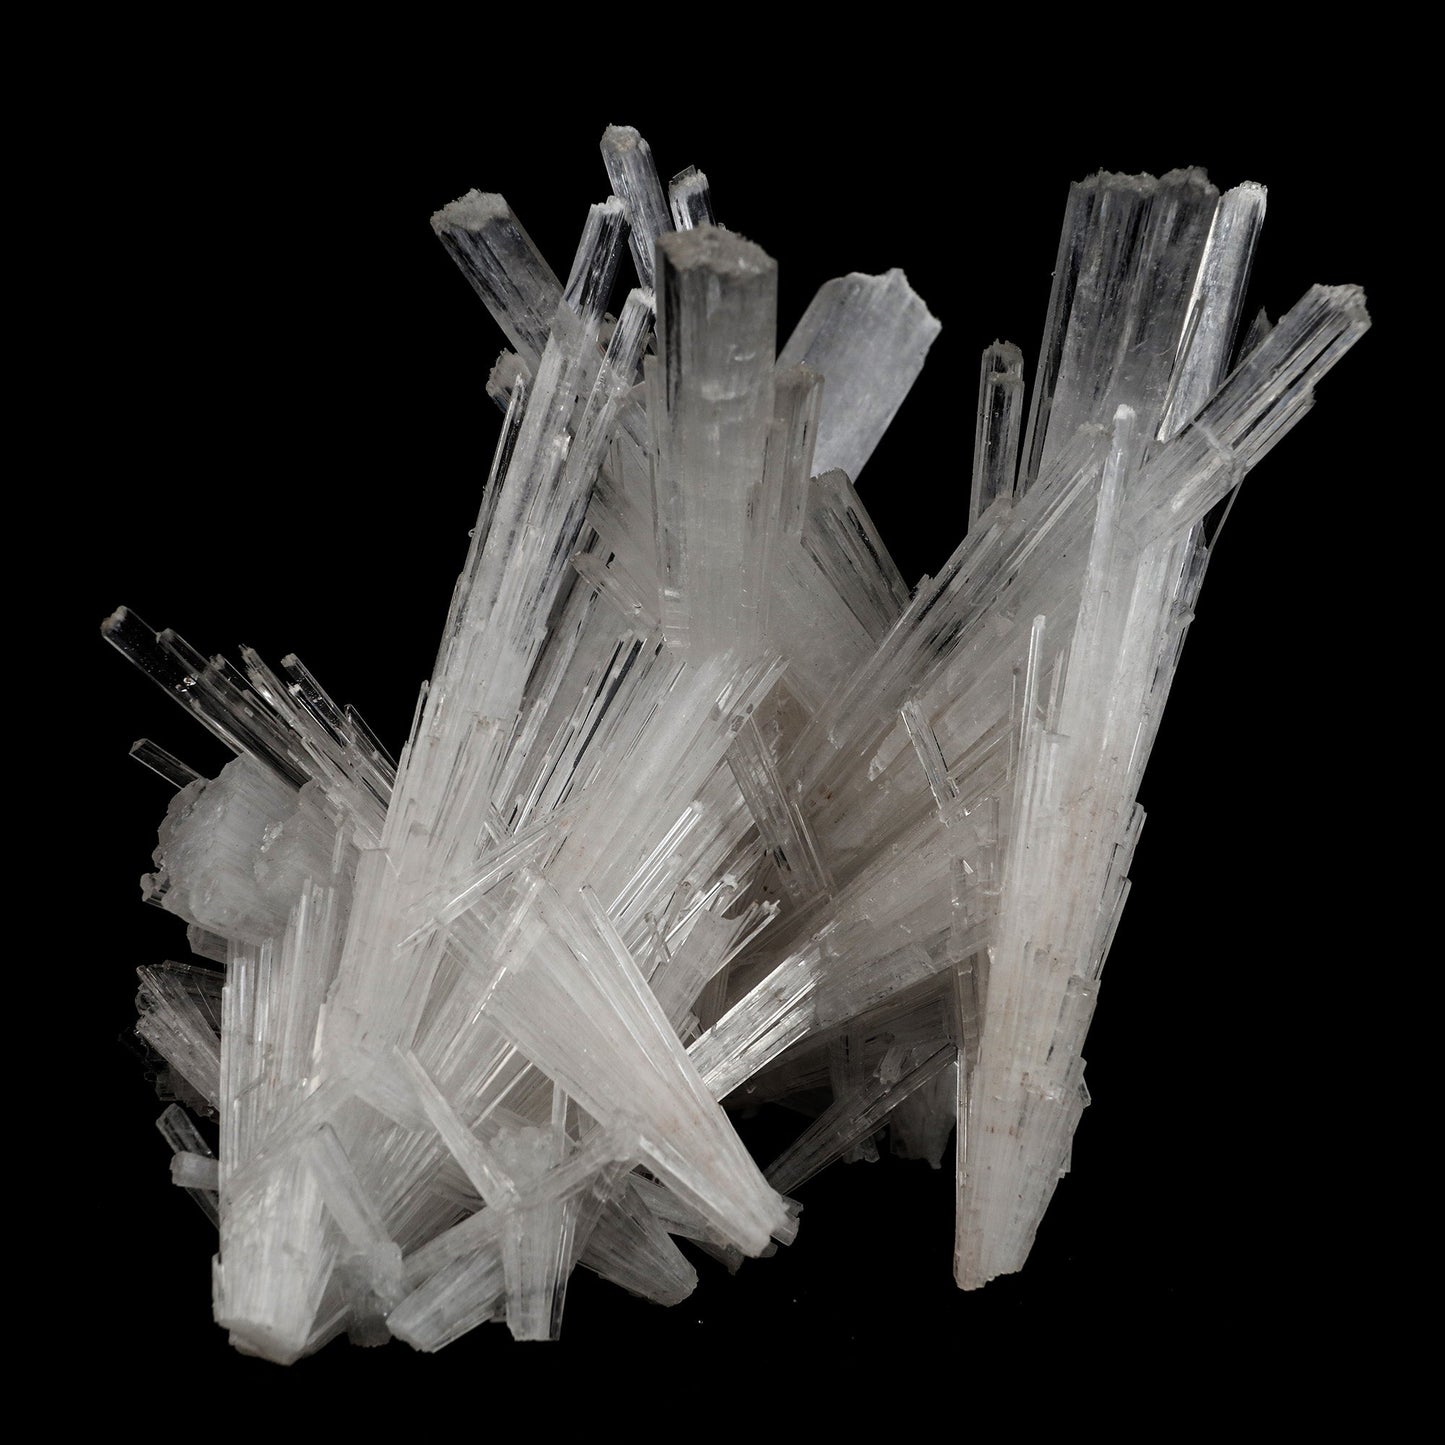 Scolecite Sprays Intergrown Natural Mineral Specimen # B 5104  https://www.superbminerals.us/products/scolecite-sprays-intergrown-natural-mineral-specimen-b-5104  Features: Recent discoveries in Nashik have yielded some spectacular intergrown jackstraw sprays of glassy, iridescent, clear to translucent scolecite prism. STUNNING. The stunning crystals extend in every direction. Primary Mineral(s): Scolecite Secondary Mineral(s): N/AMatrix: N/A 4.5 Inch x 4 InchWeight : 319